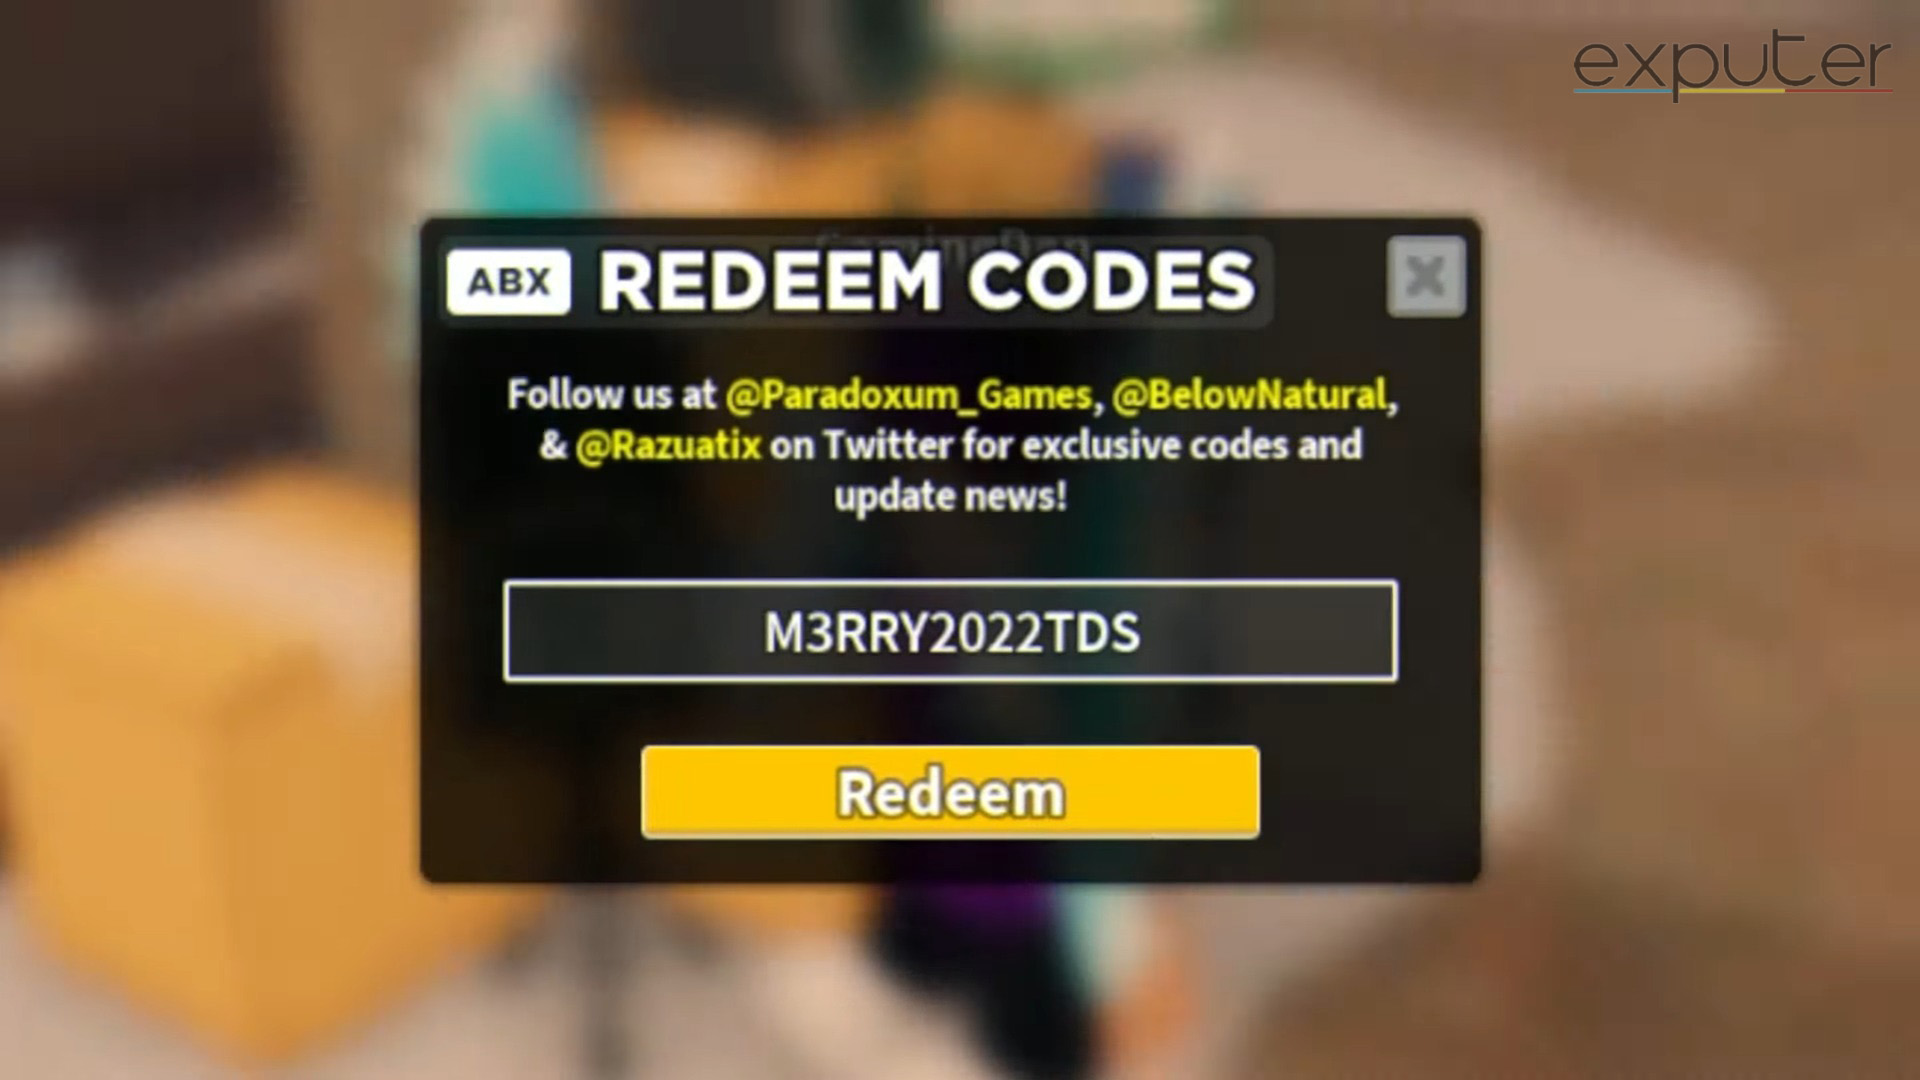 How to Redeem Codes in Tower Defense Simulator